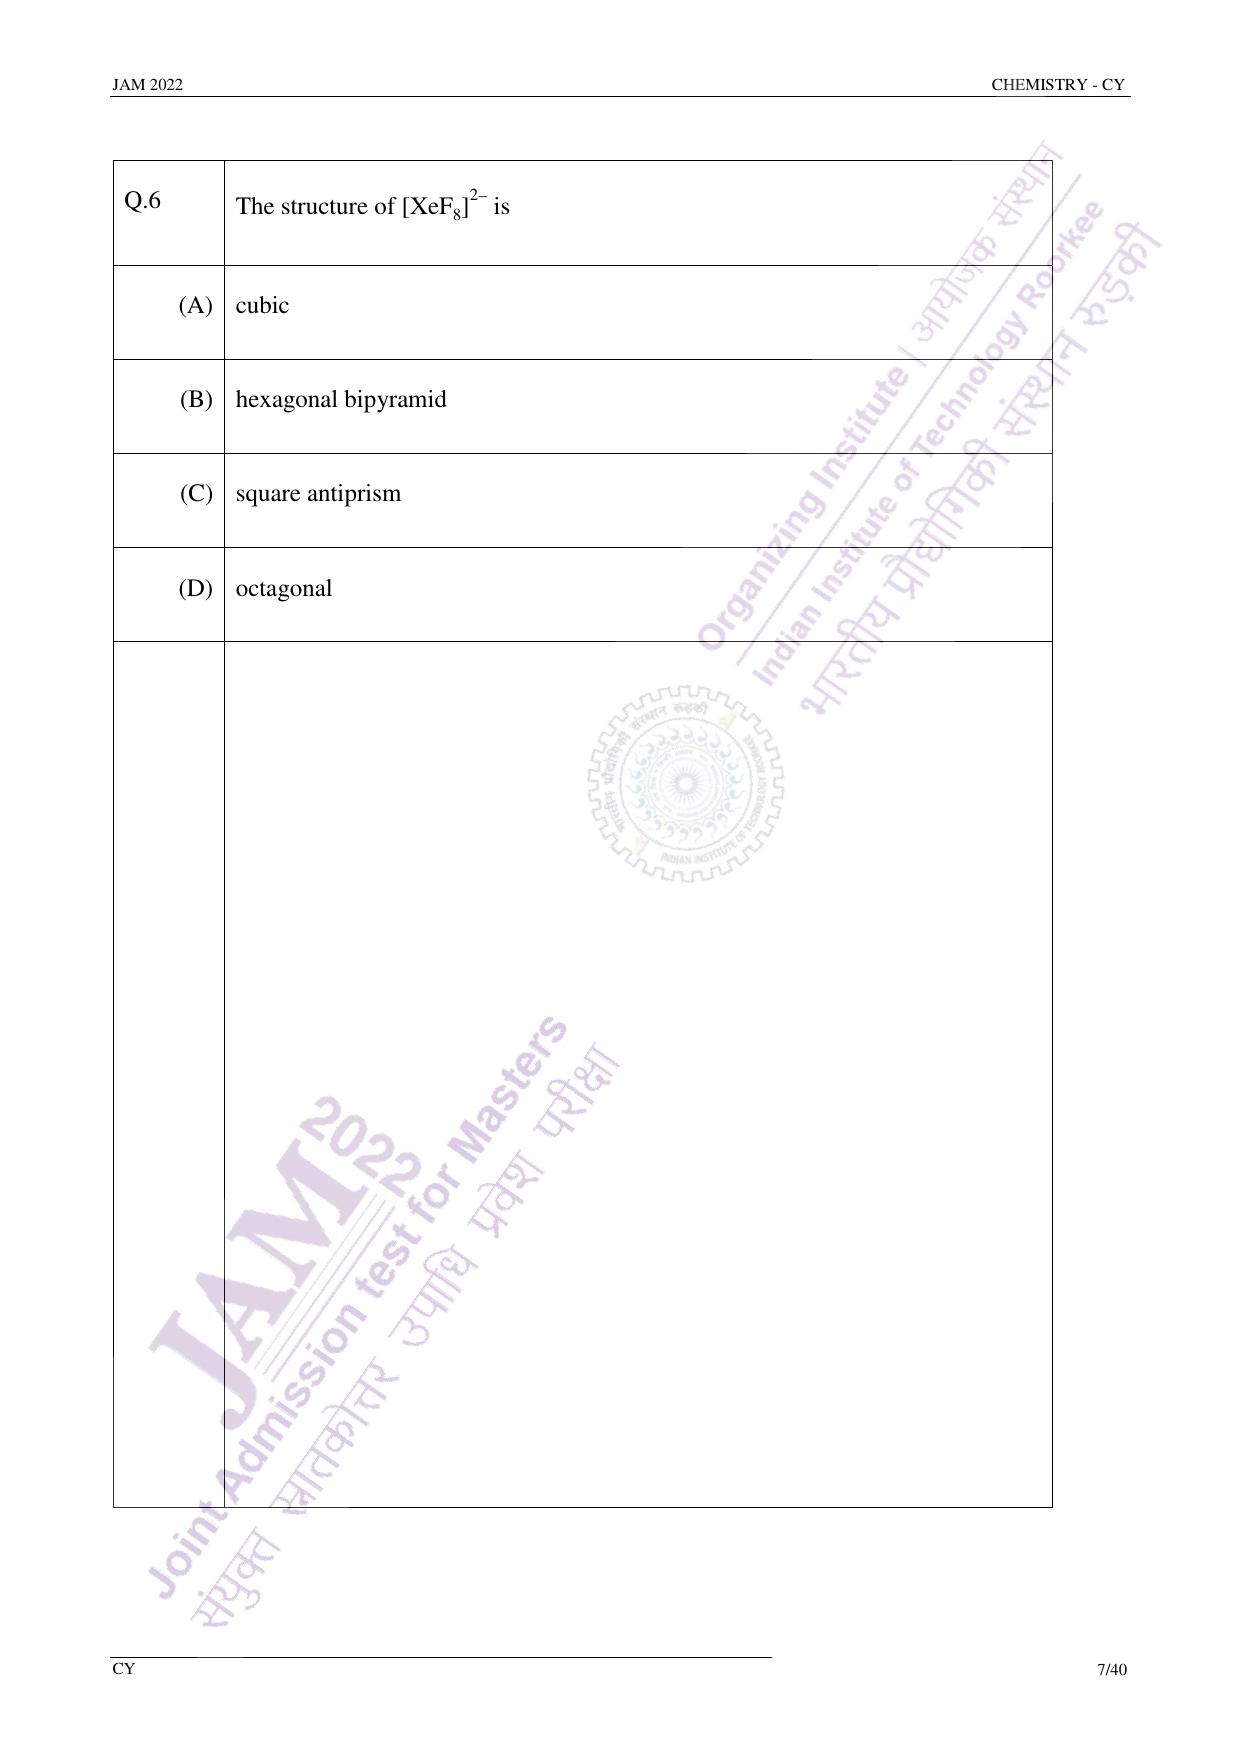 JAM 2022: CY Question Paper - Page 6